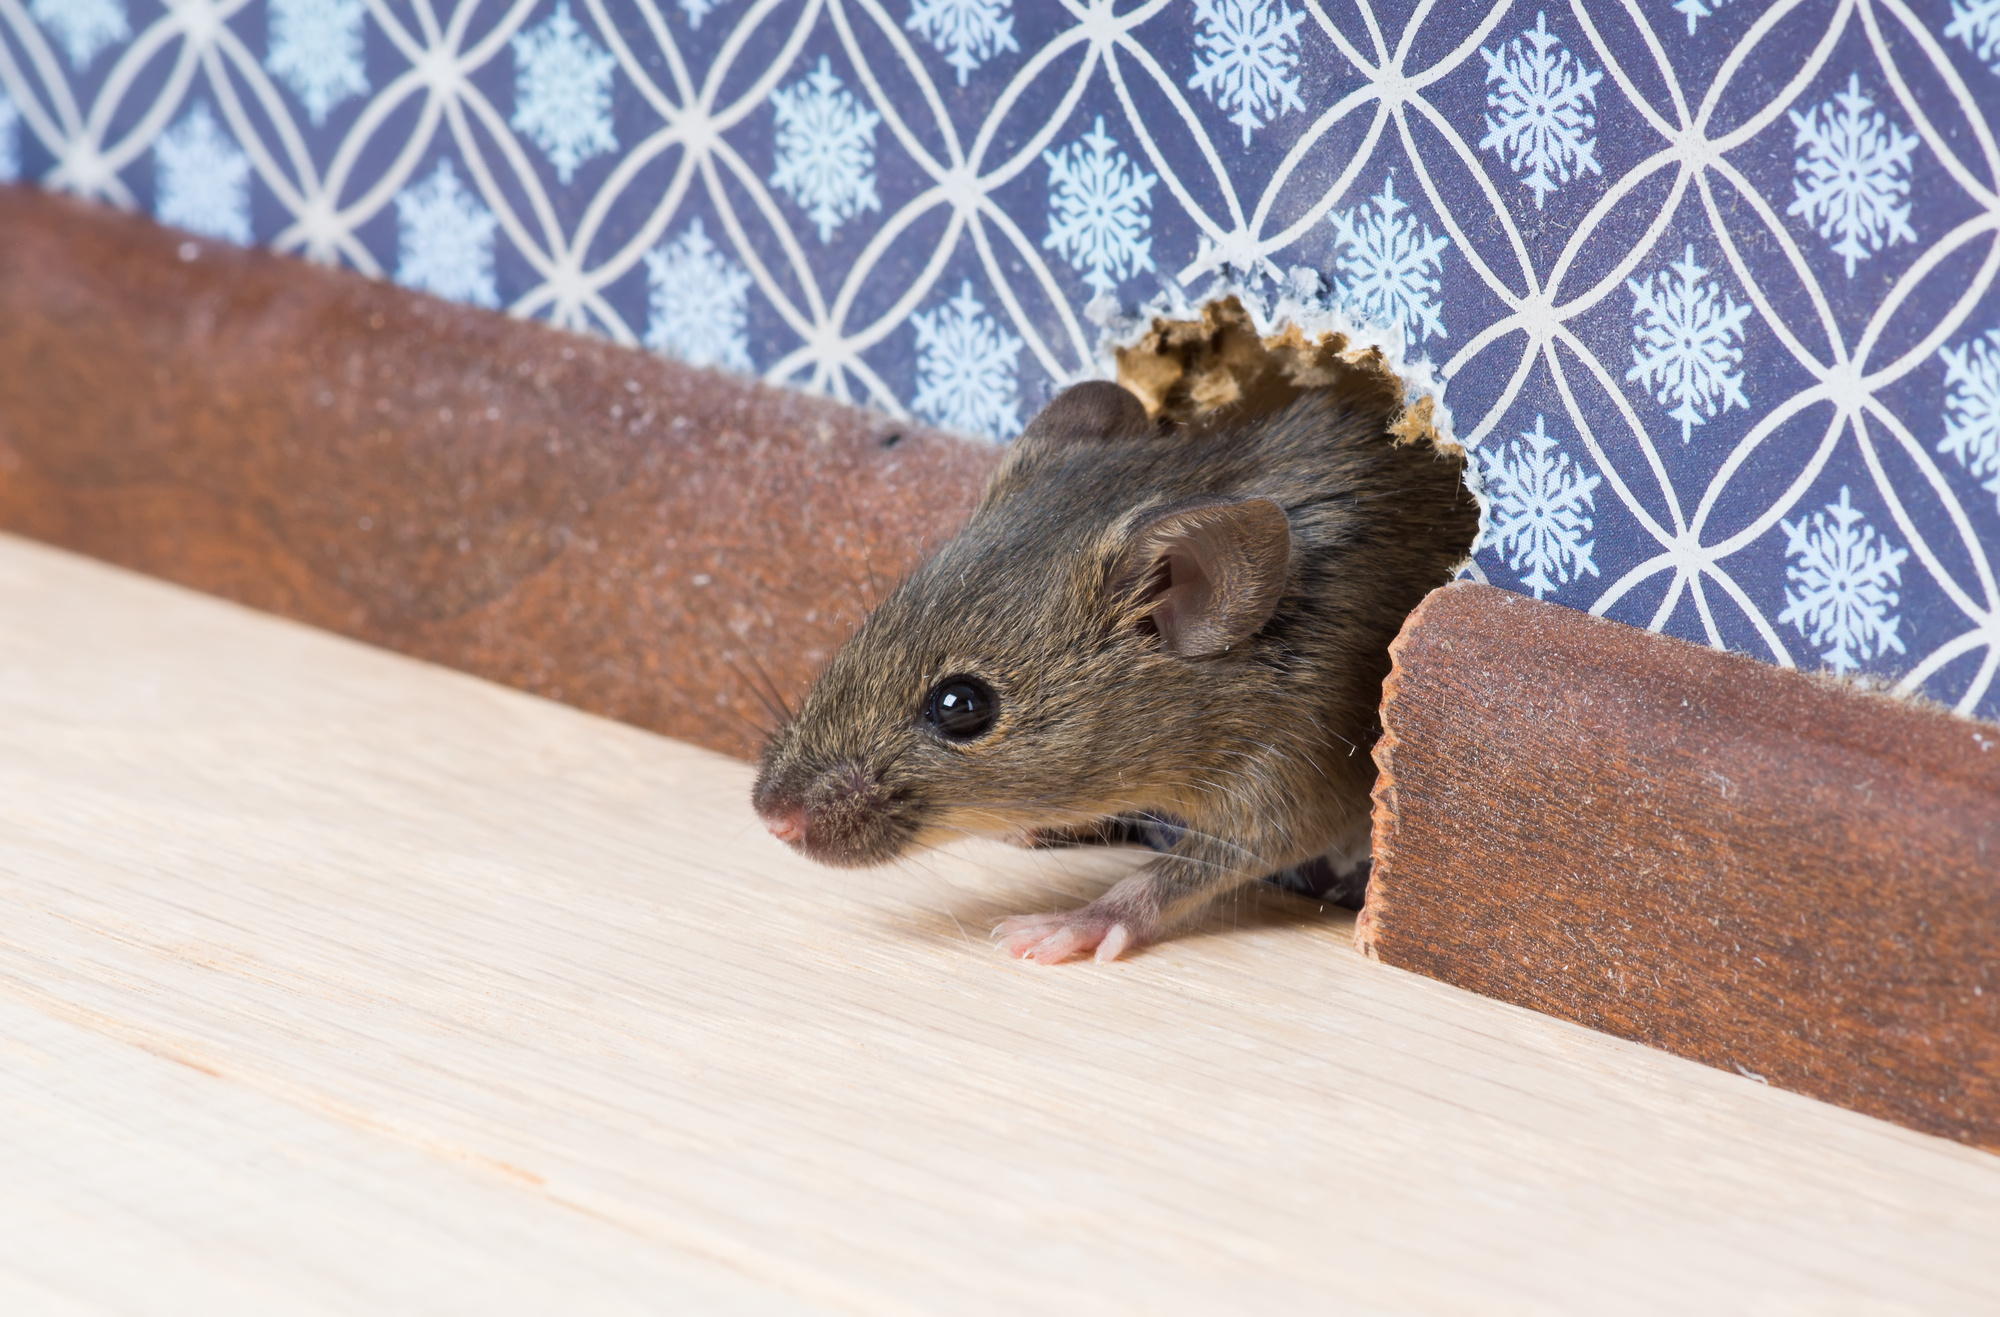 Common Pest Animals That May Be in Your Home